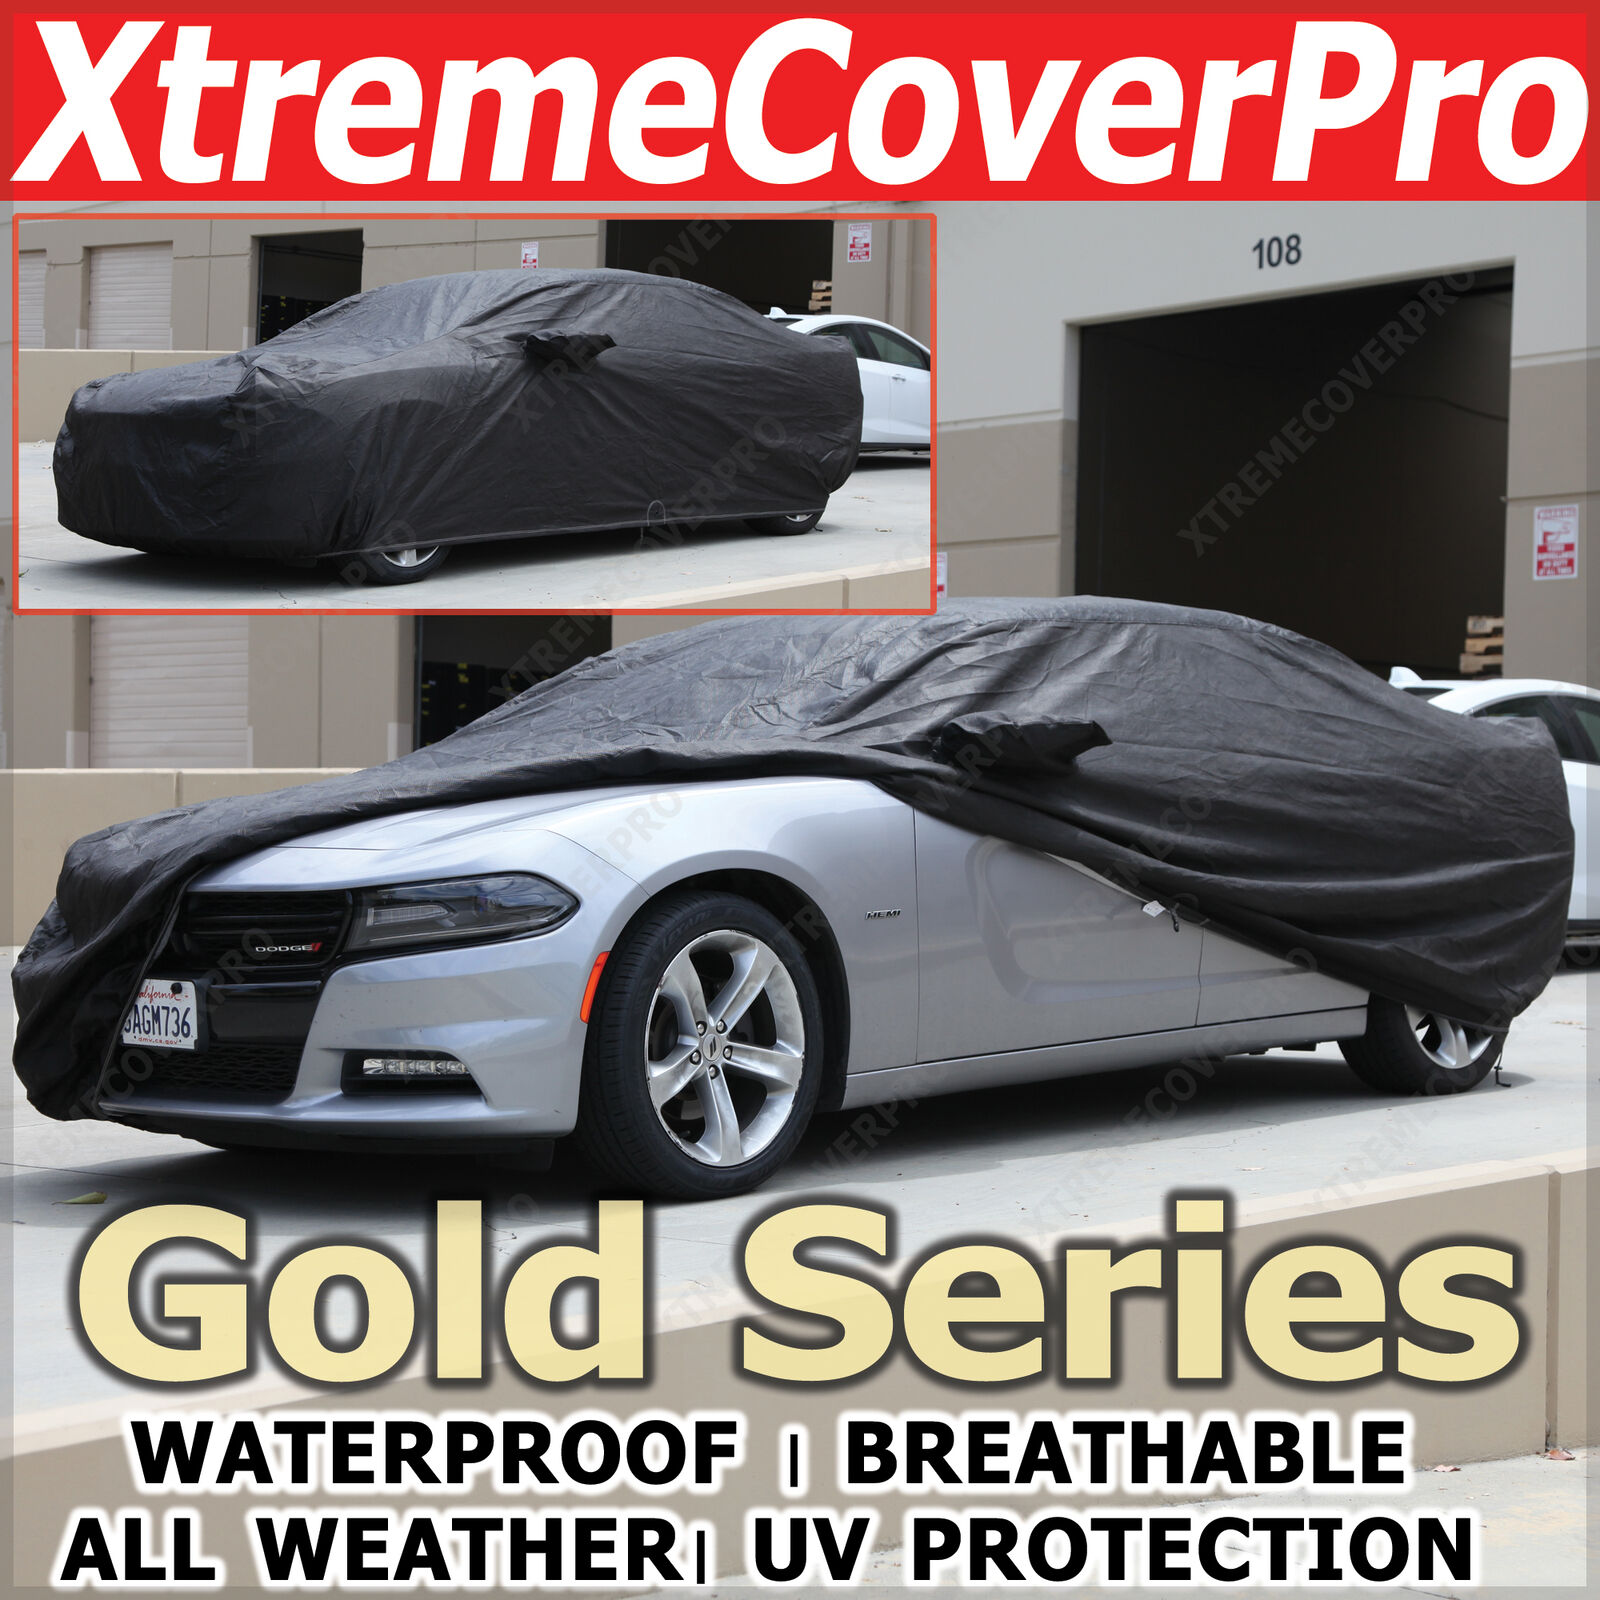 2012 2013 2014 2015 AUDI A7 S7 RS7 WATERPROOF CAR COVER W/MIRRORPOCKET BLACK